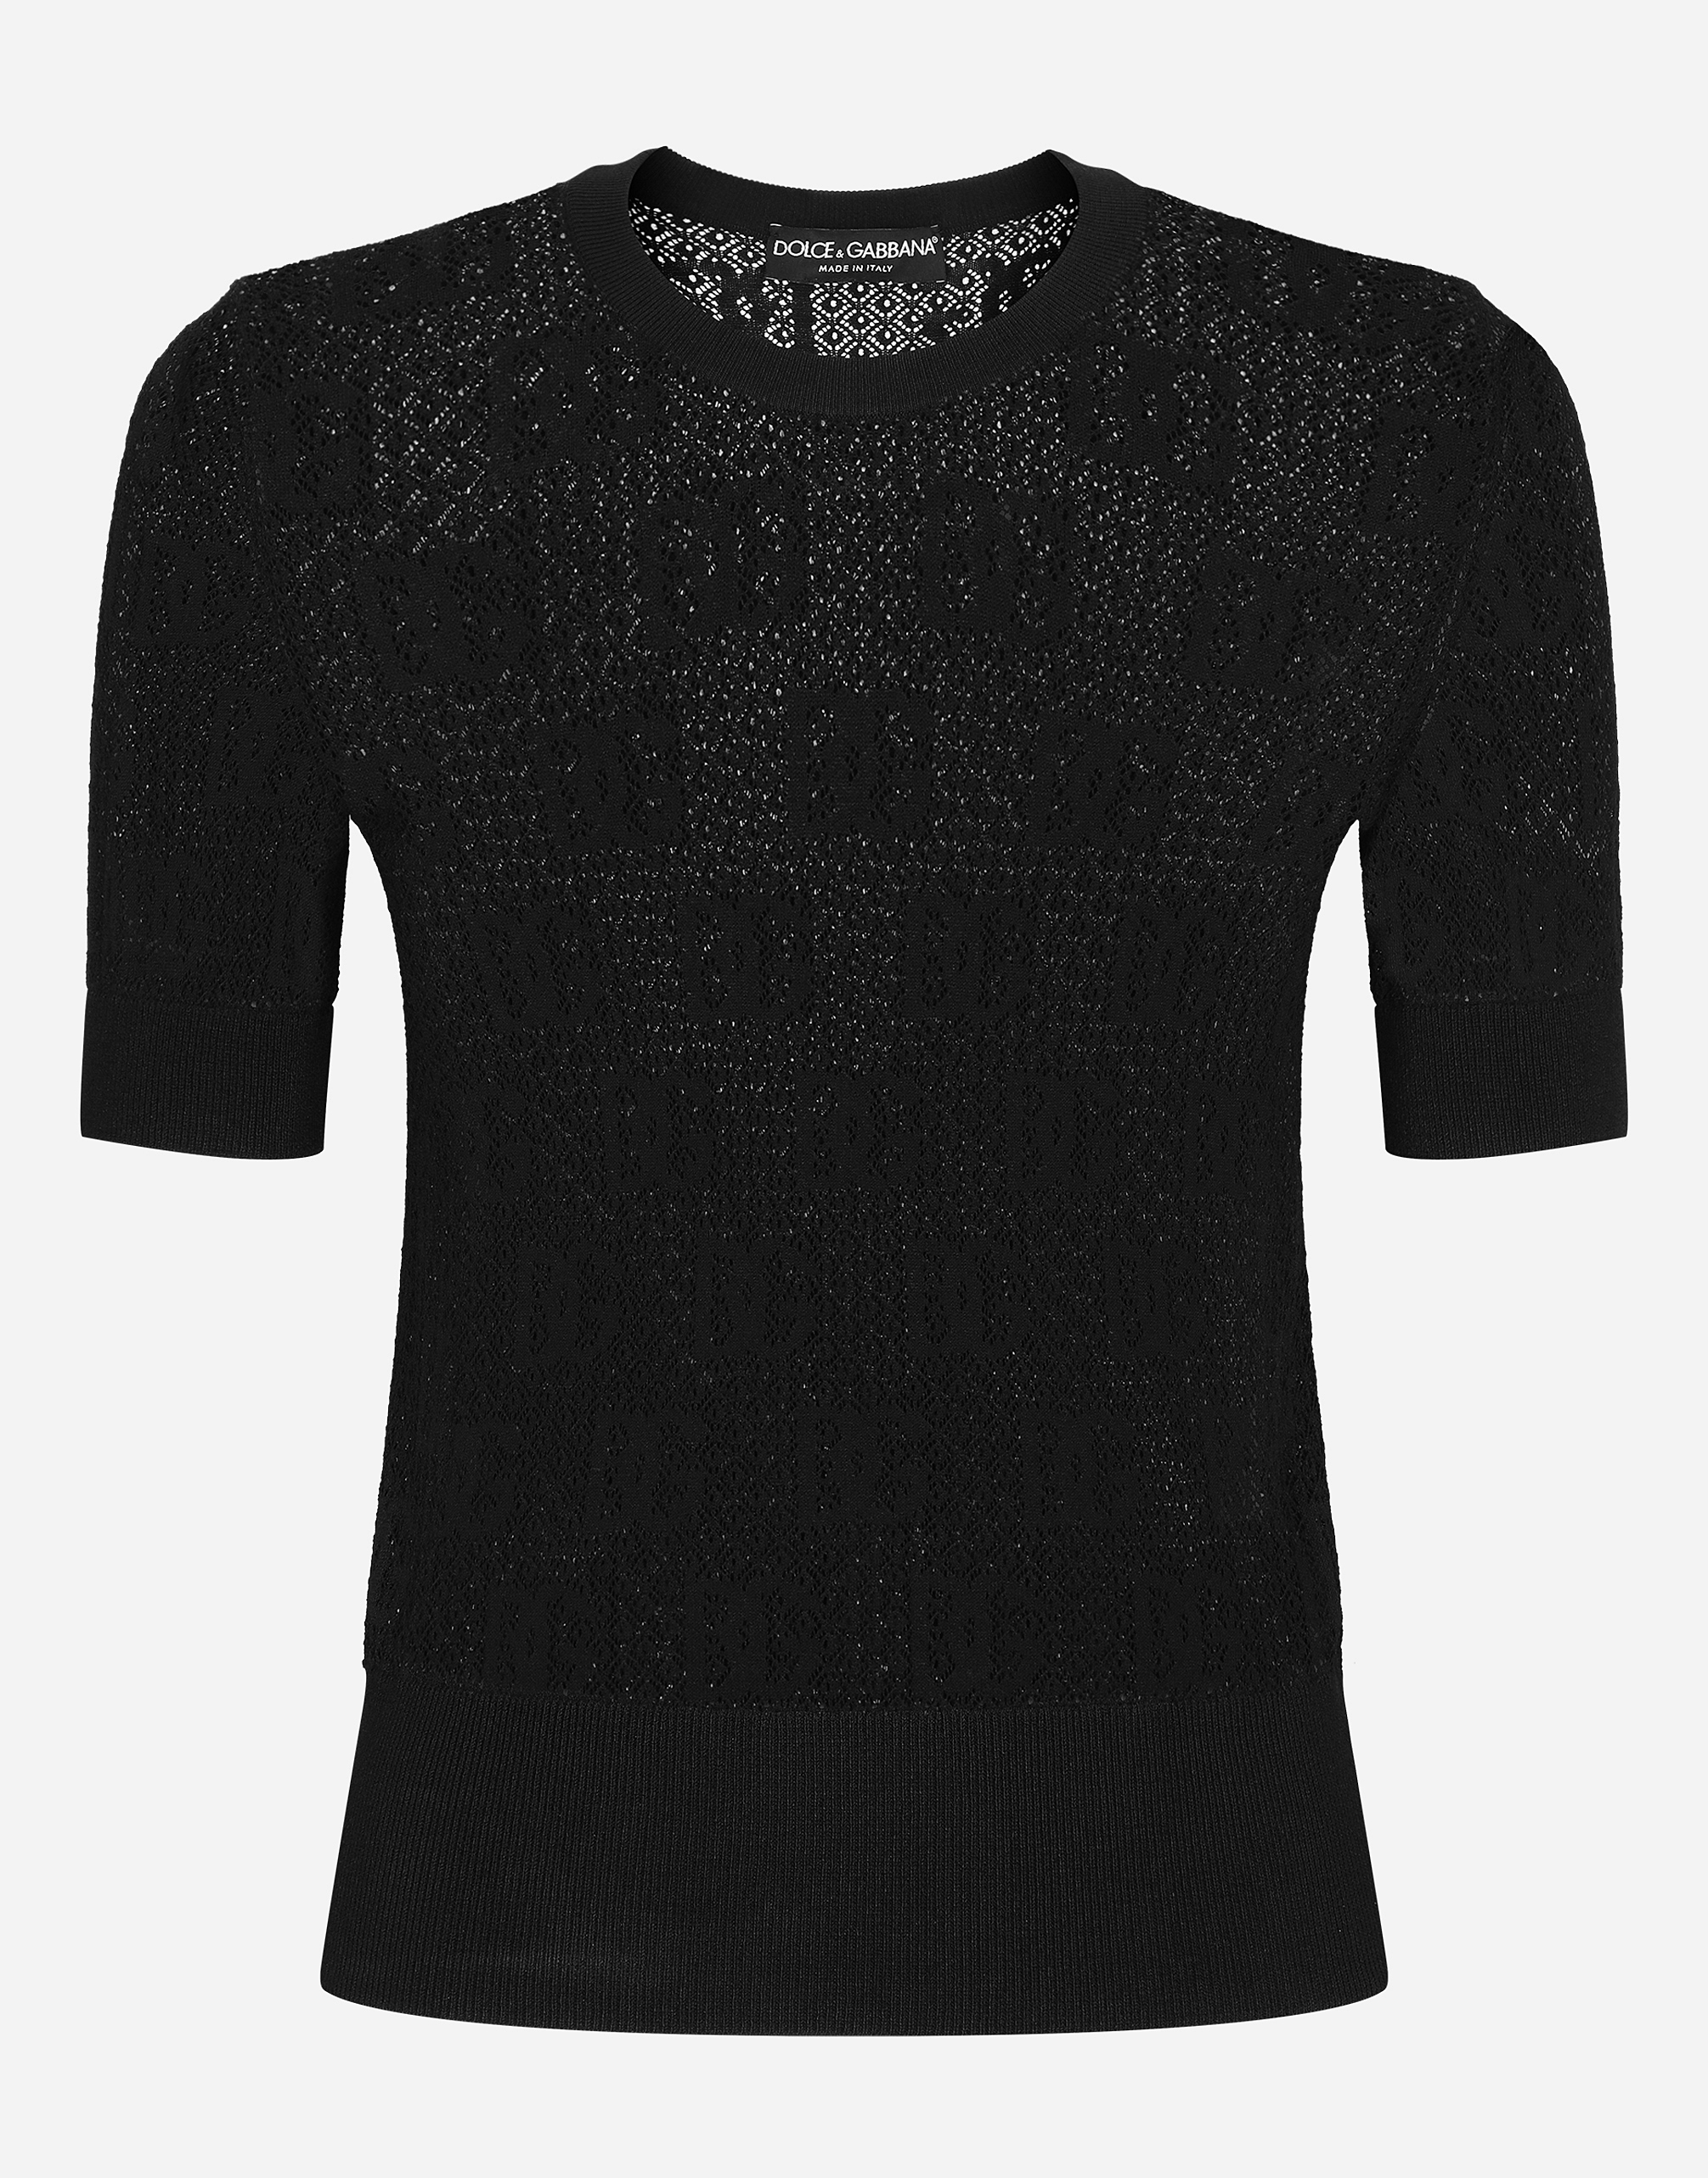 Short-sleeved lace-stitch sweater with DG logo in Black